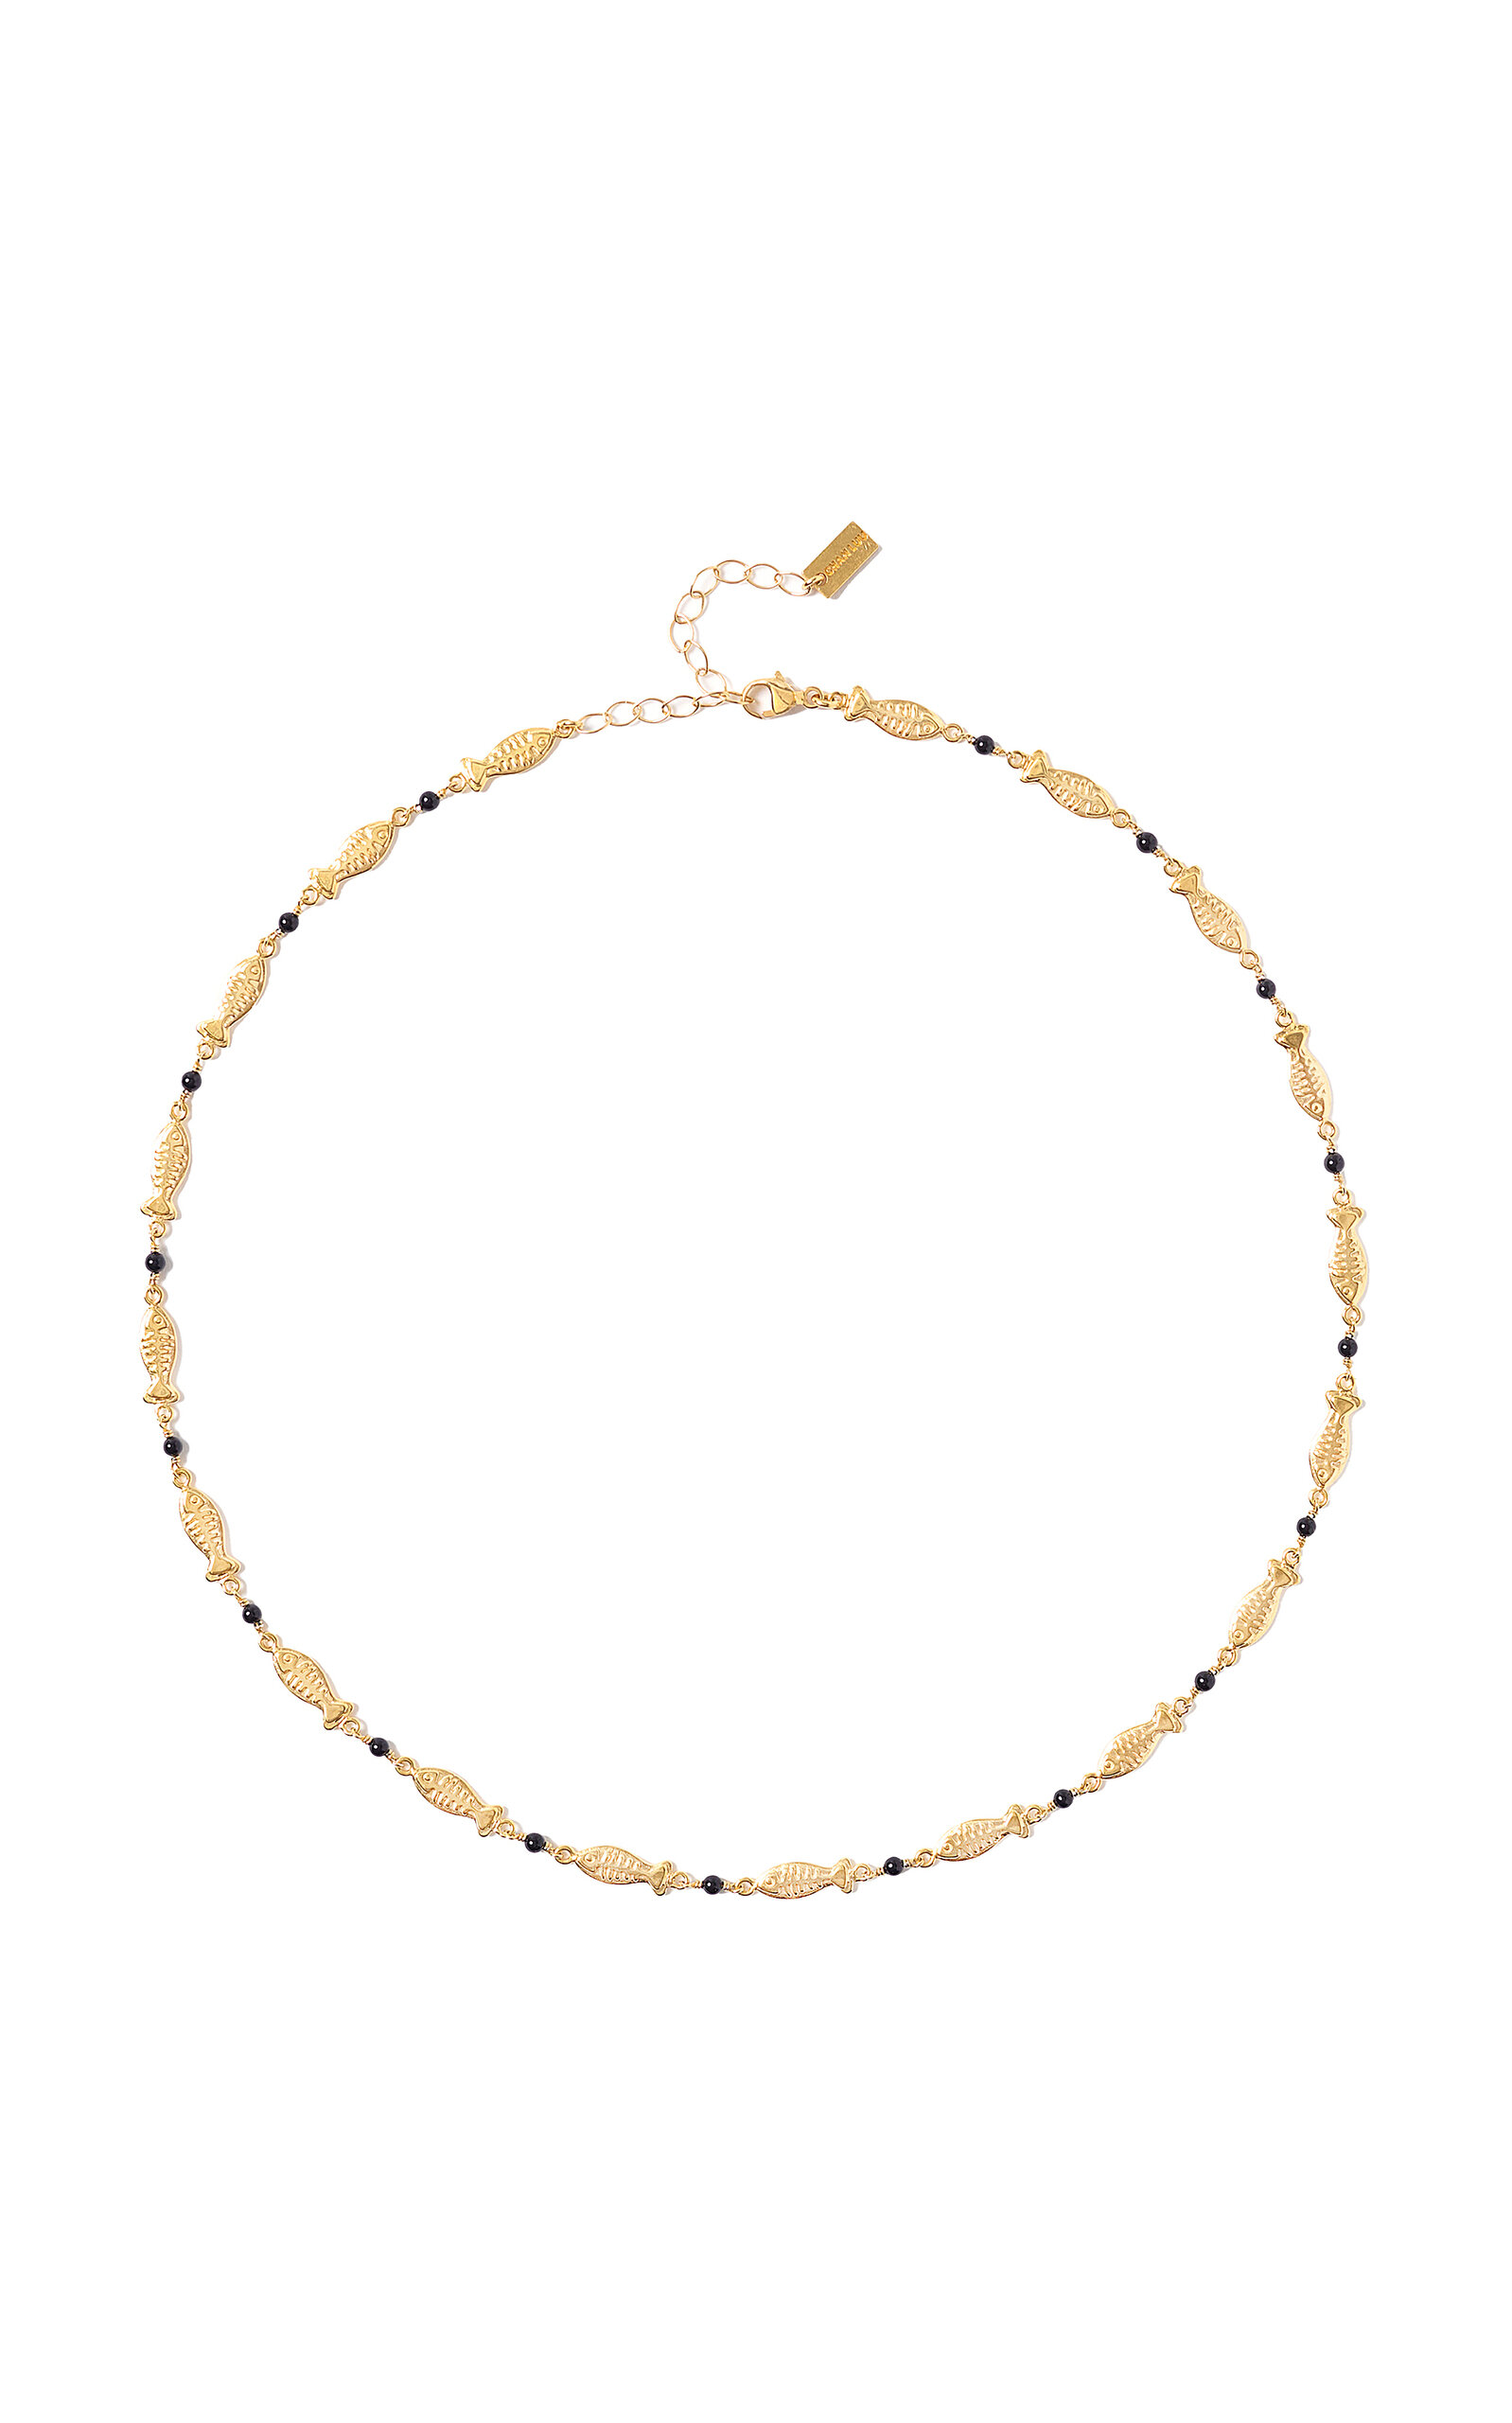 Exclusive Minnow 18K Gold Plated Onyx Necklace